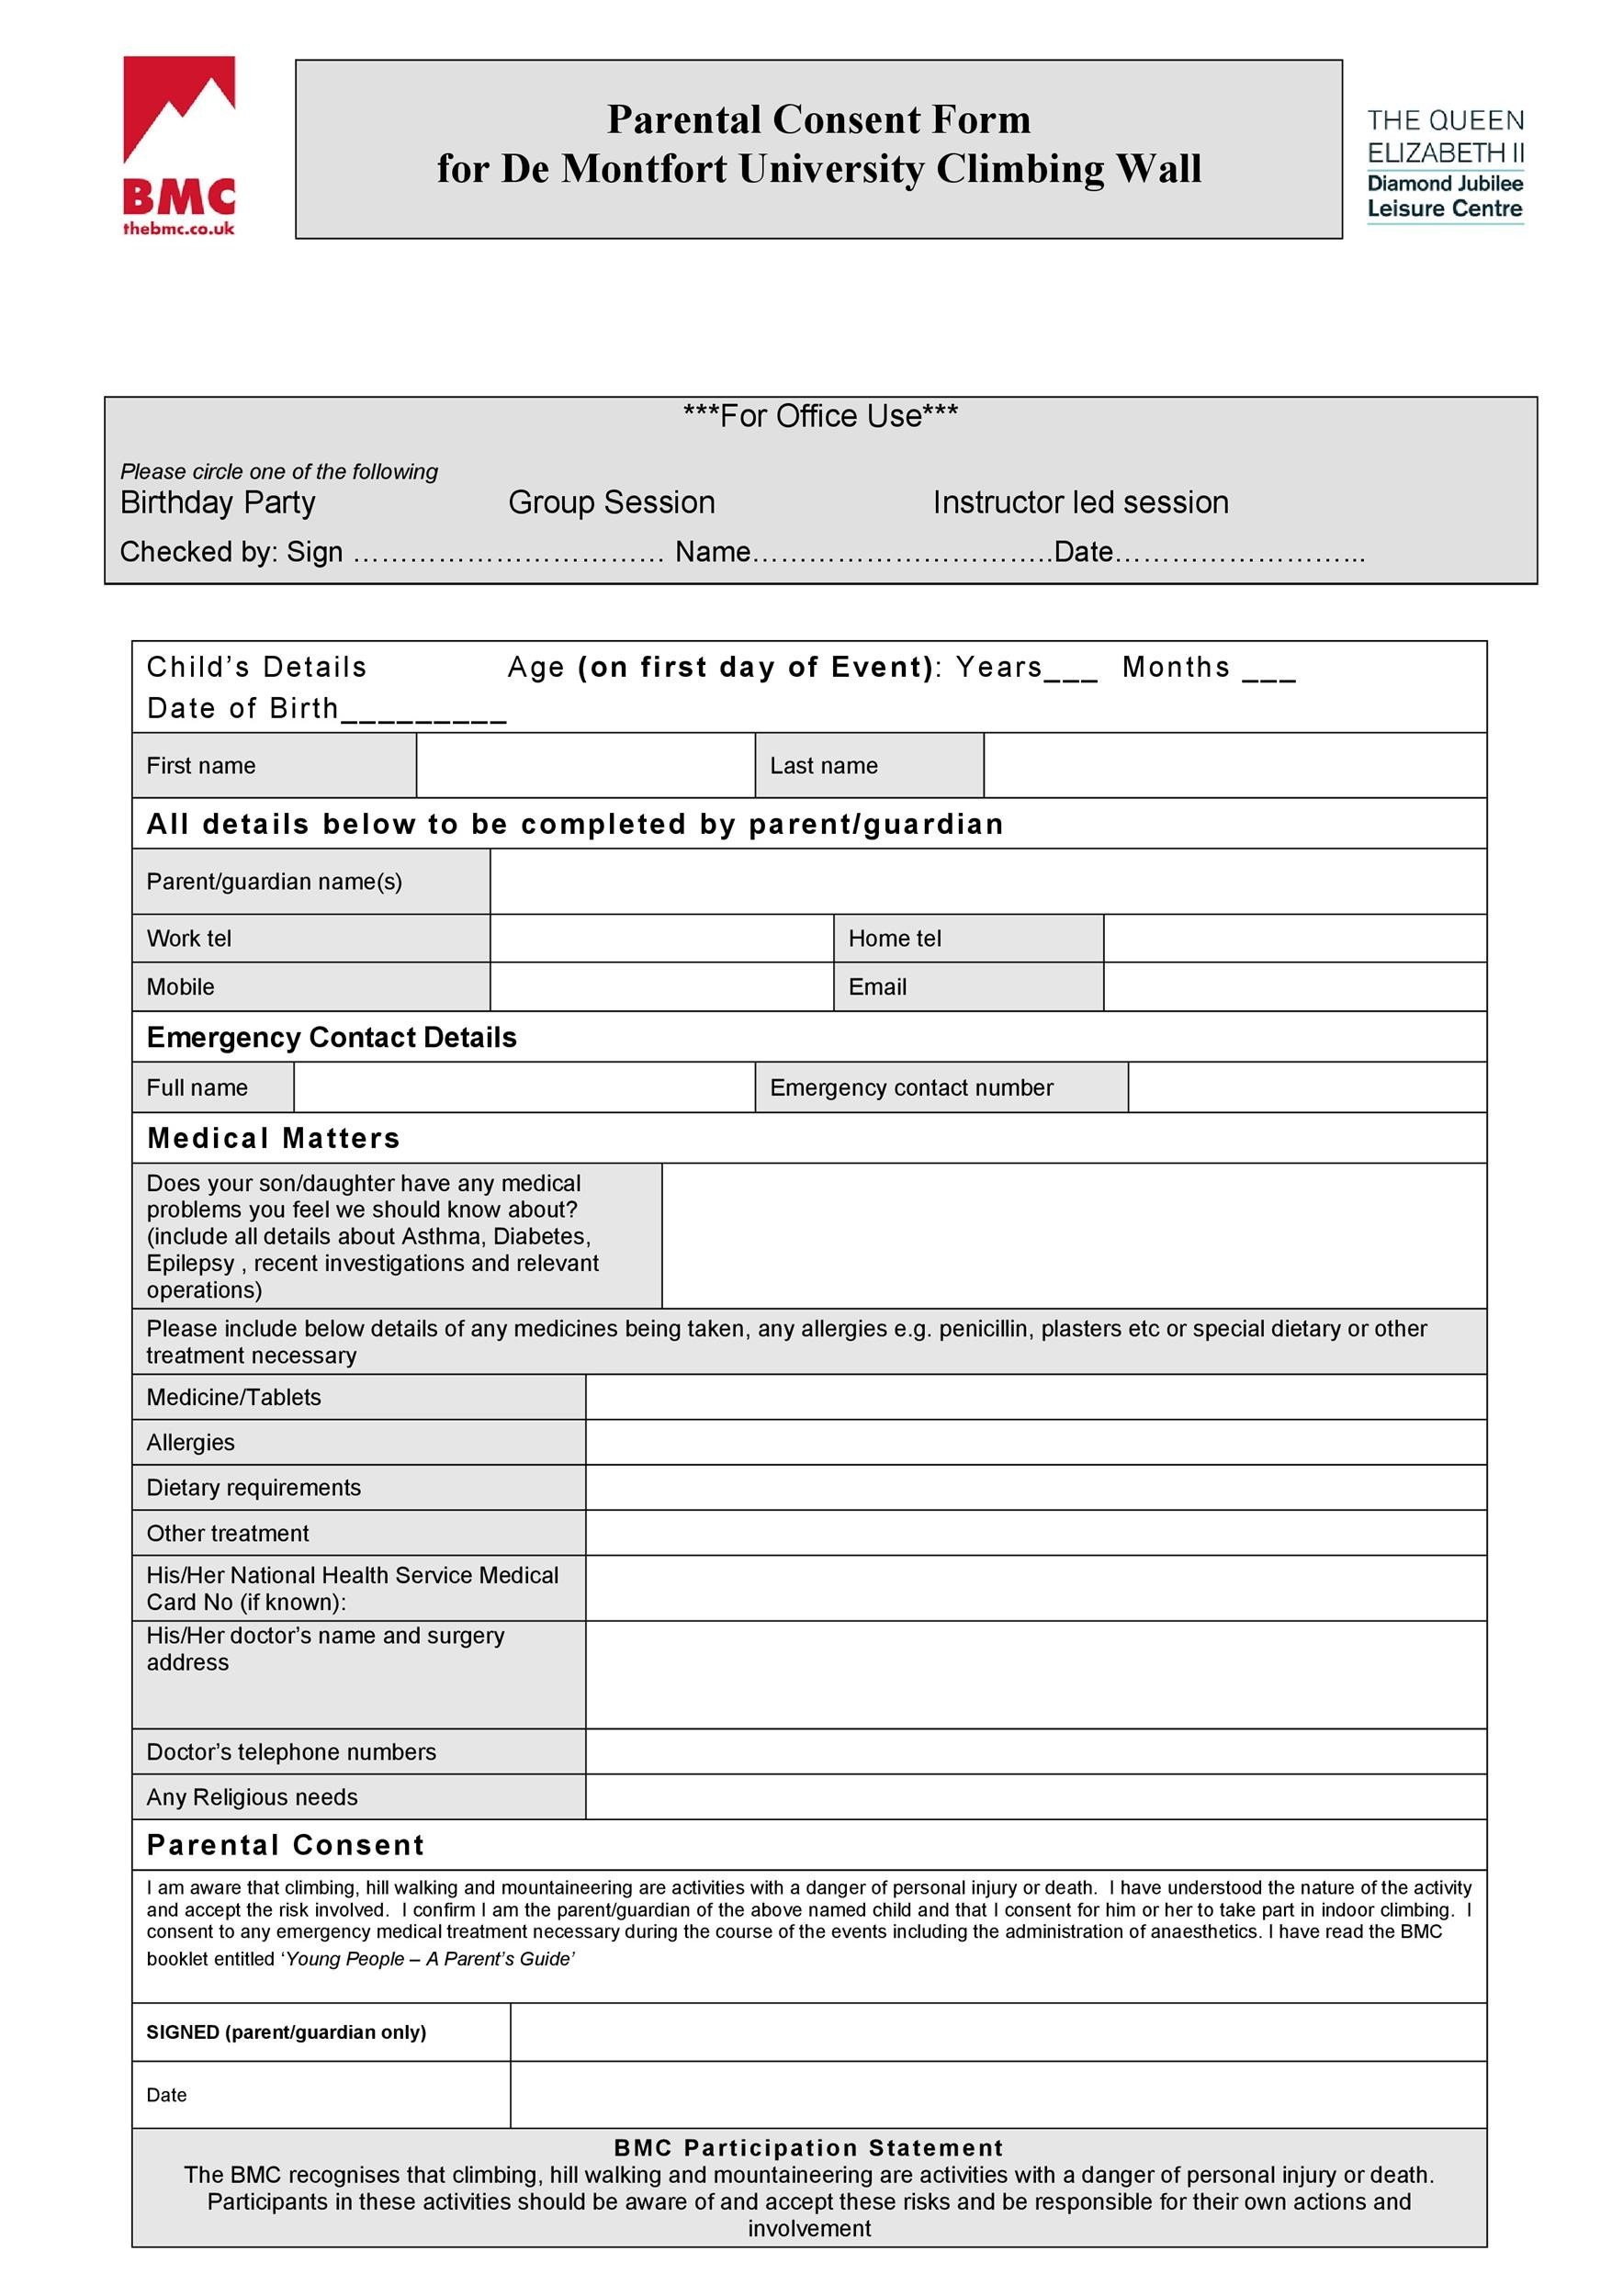 Free parental consent form template 20